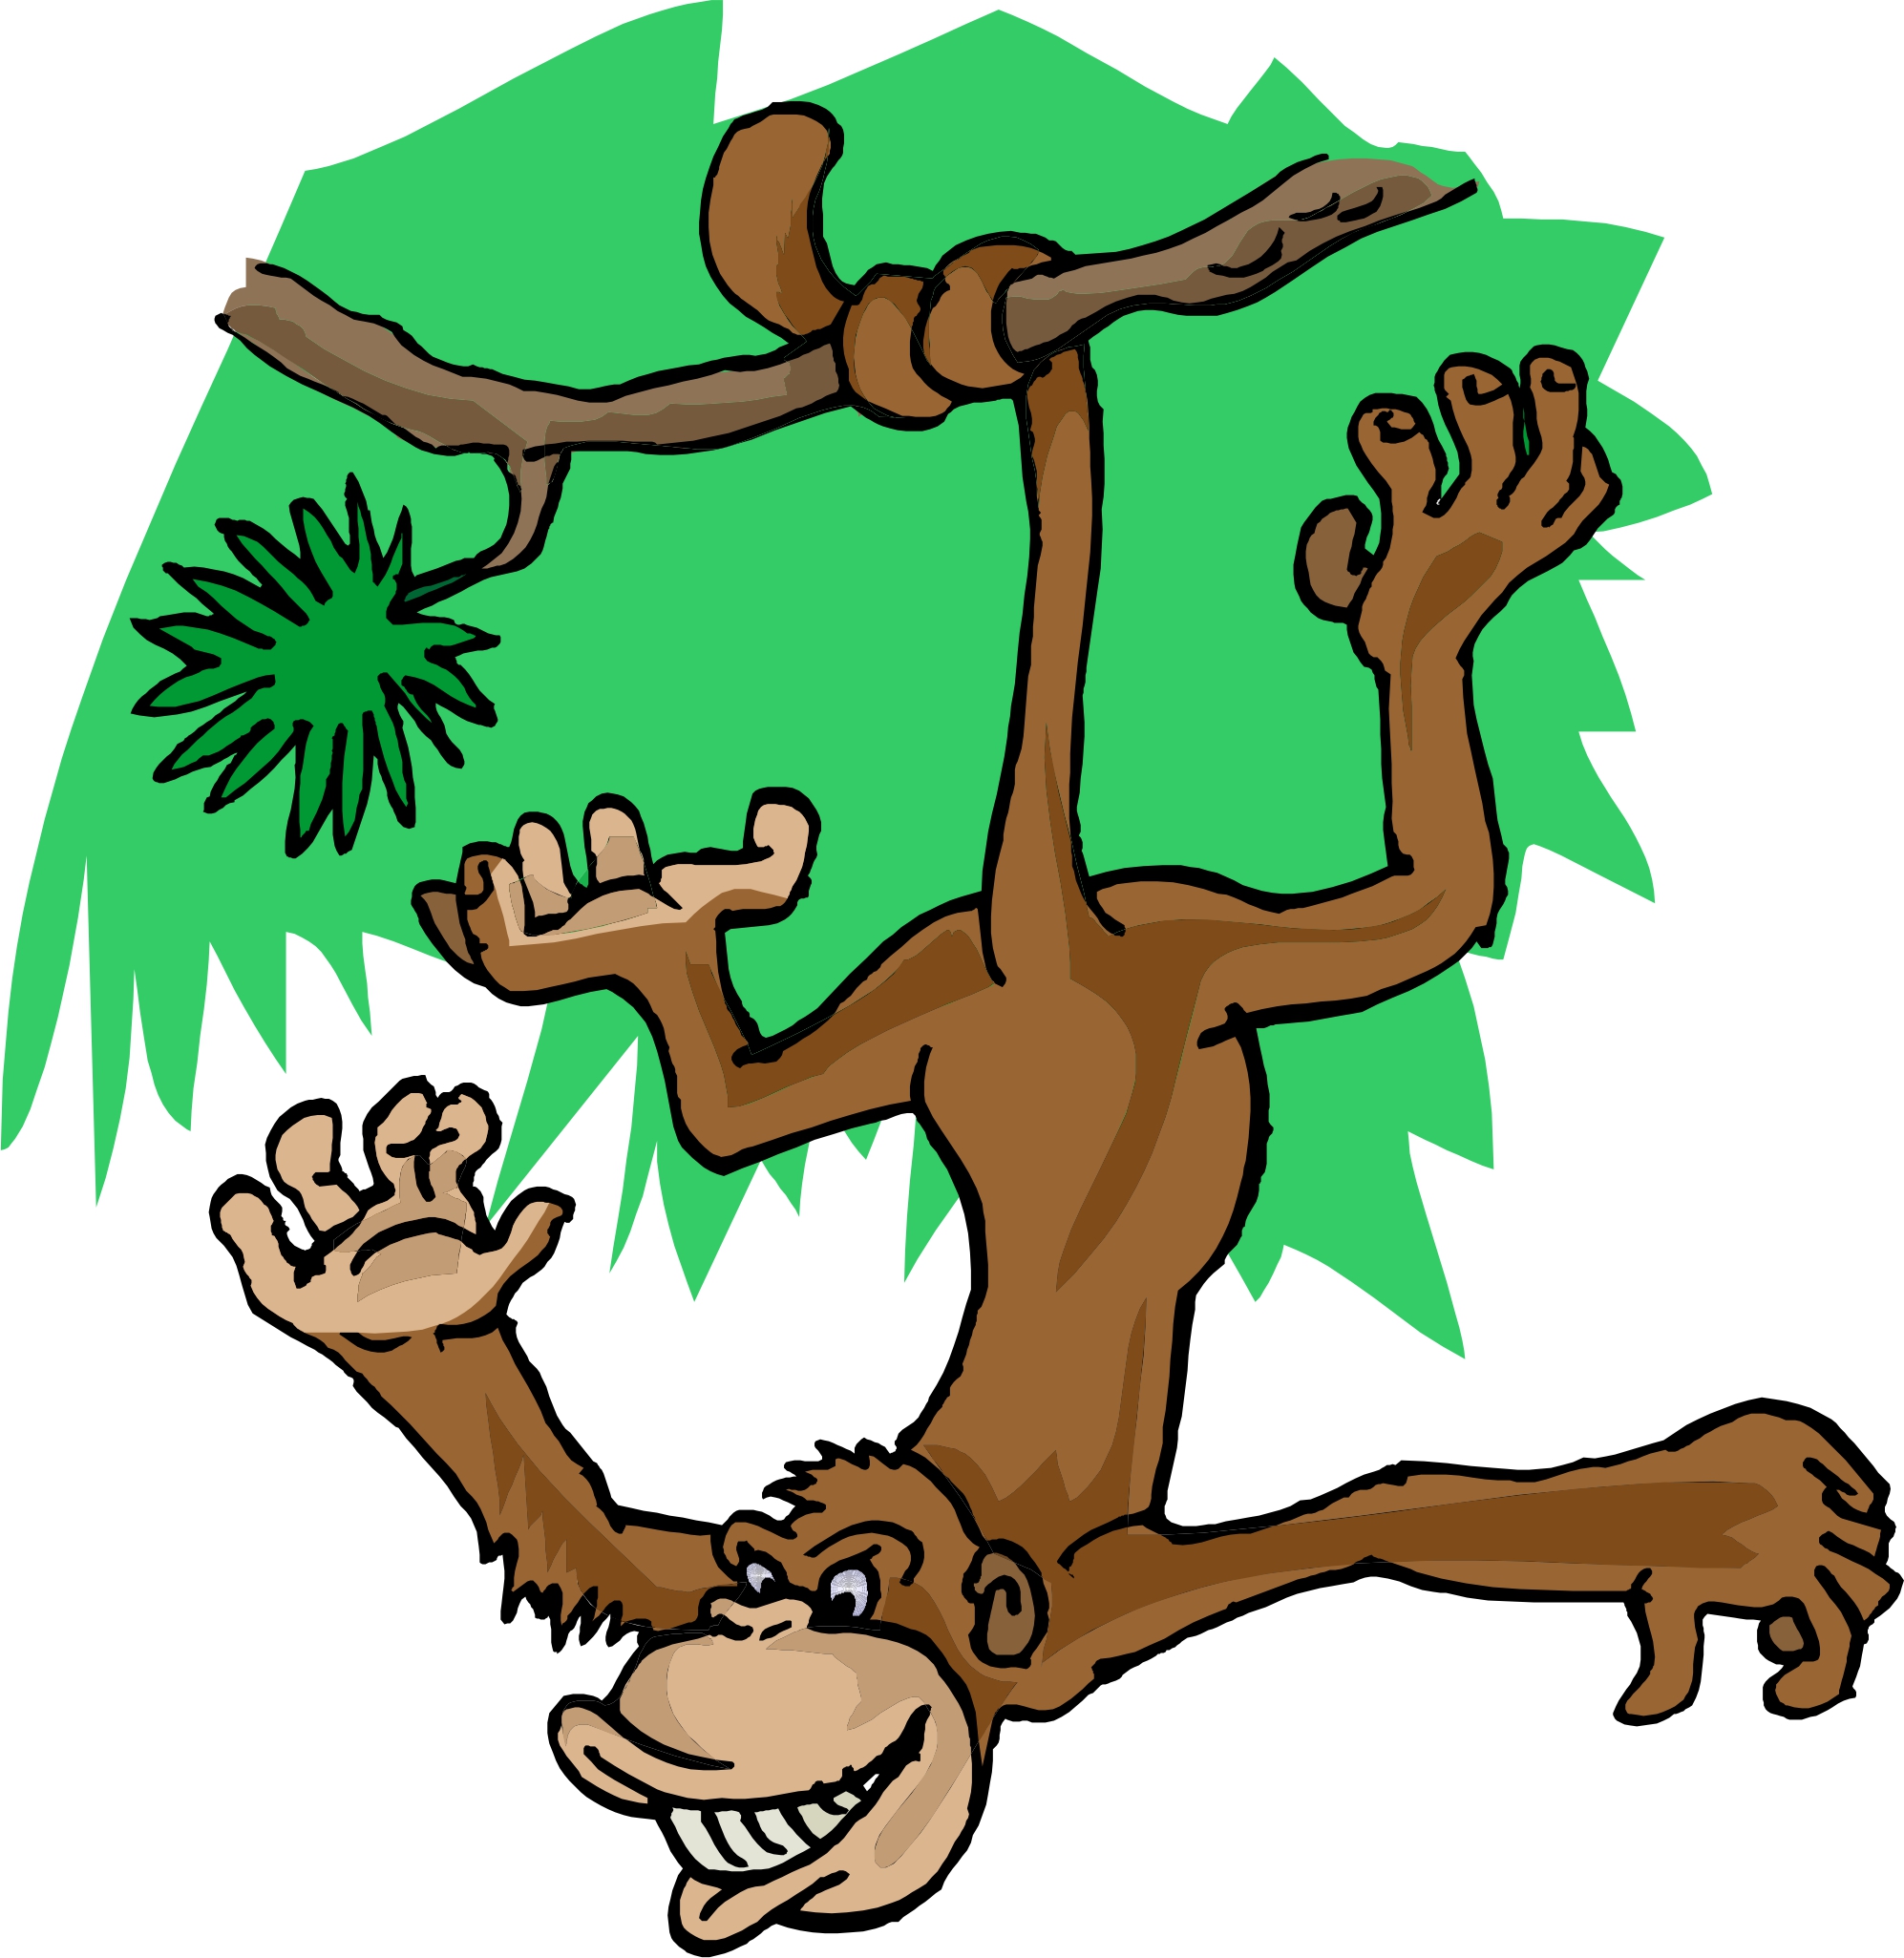 monkey in a tree clipart - photo #23